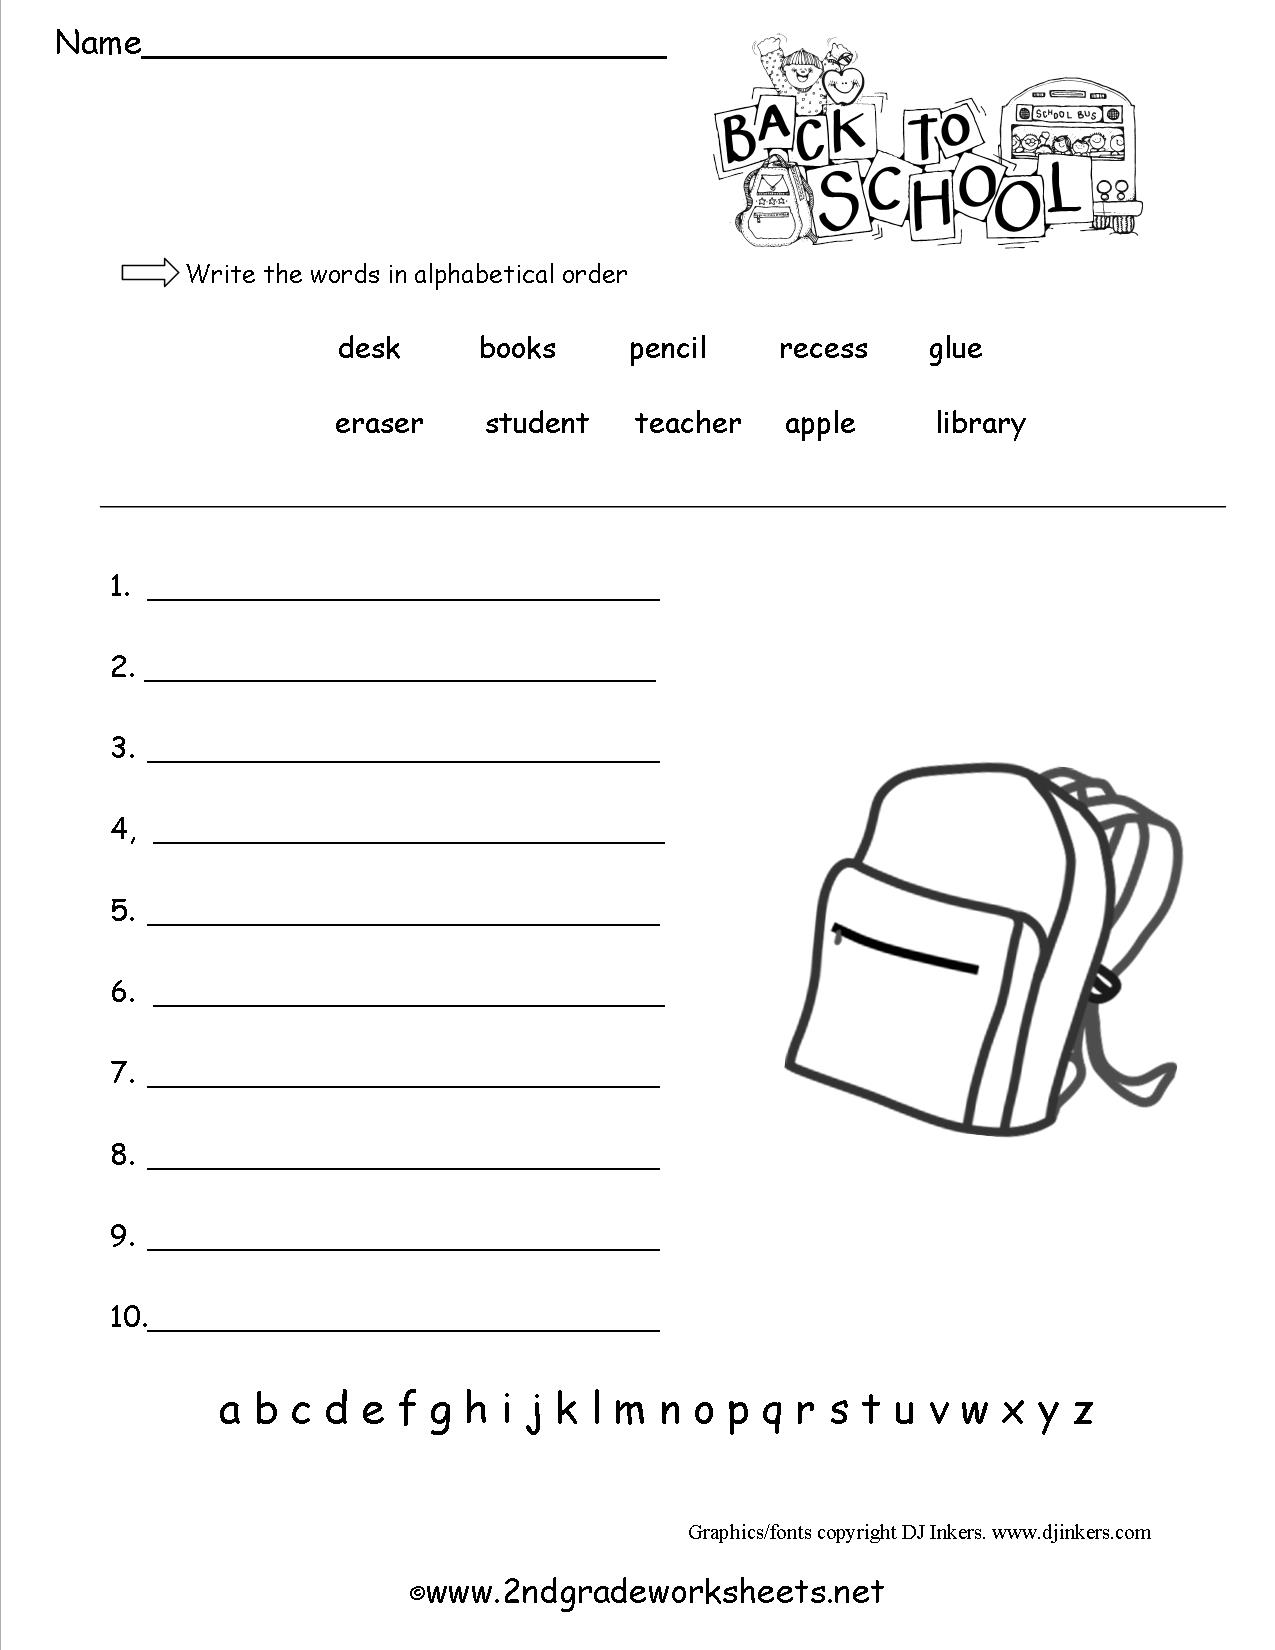 6-best-images-of-printable-school-worksheets-for-3rd-graders-7th